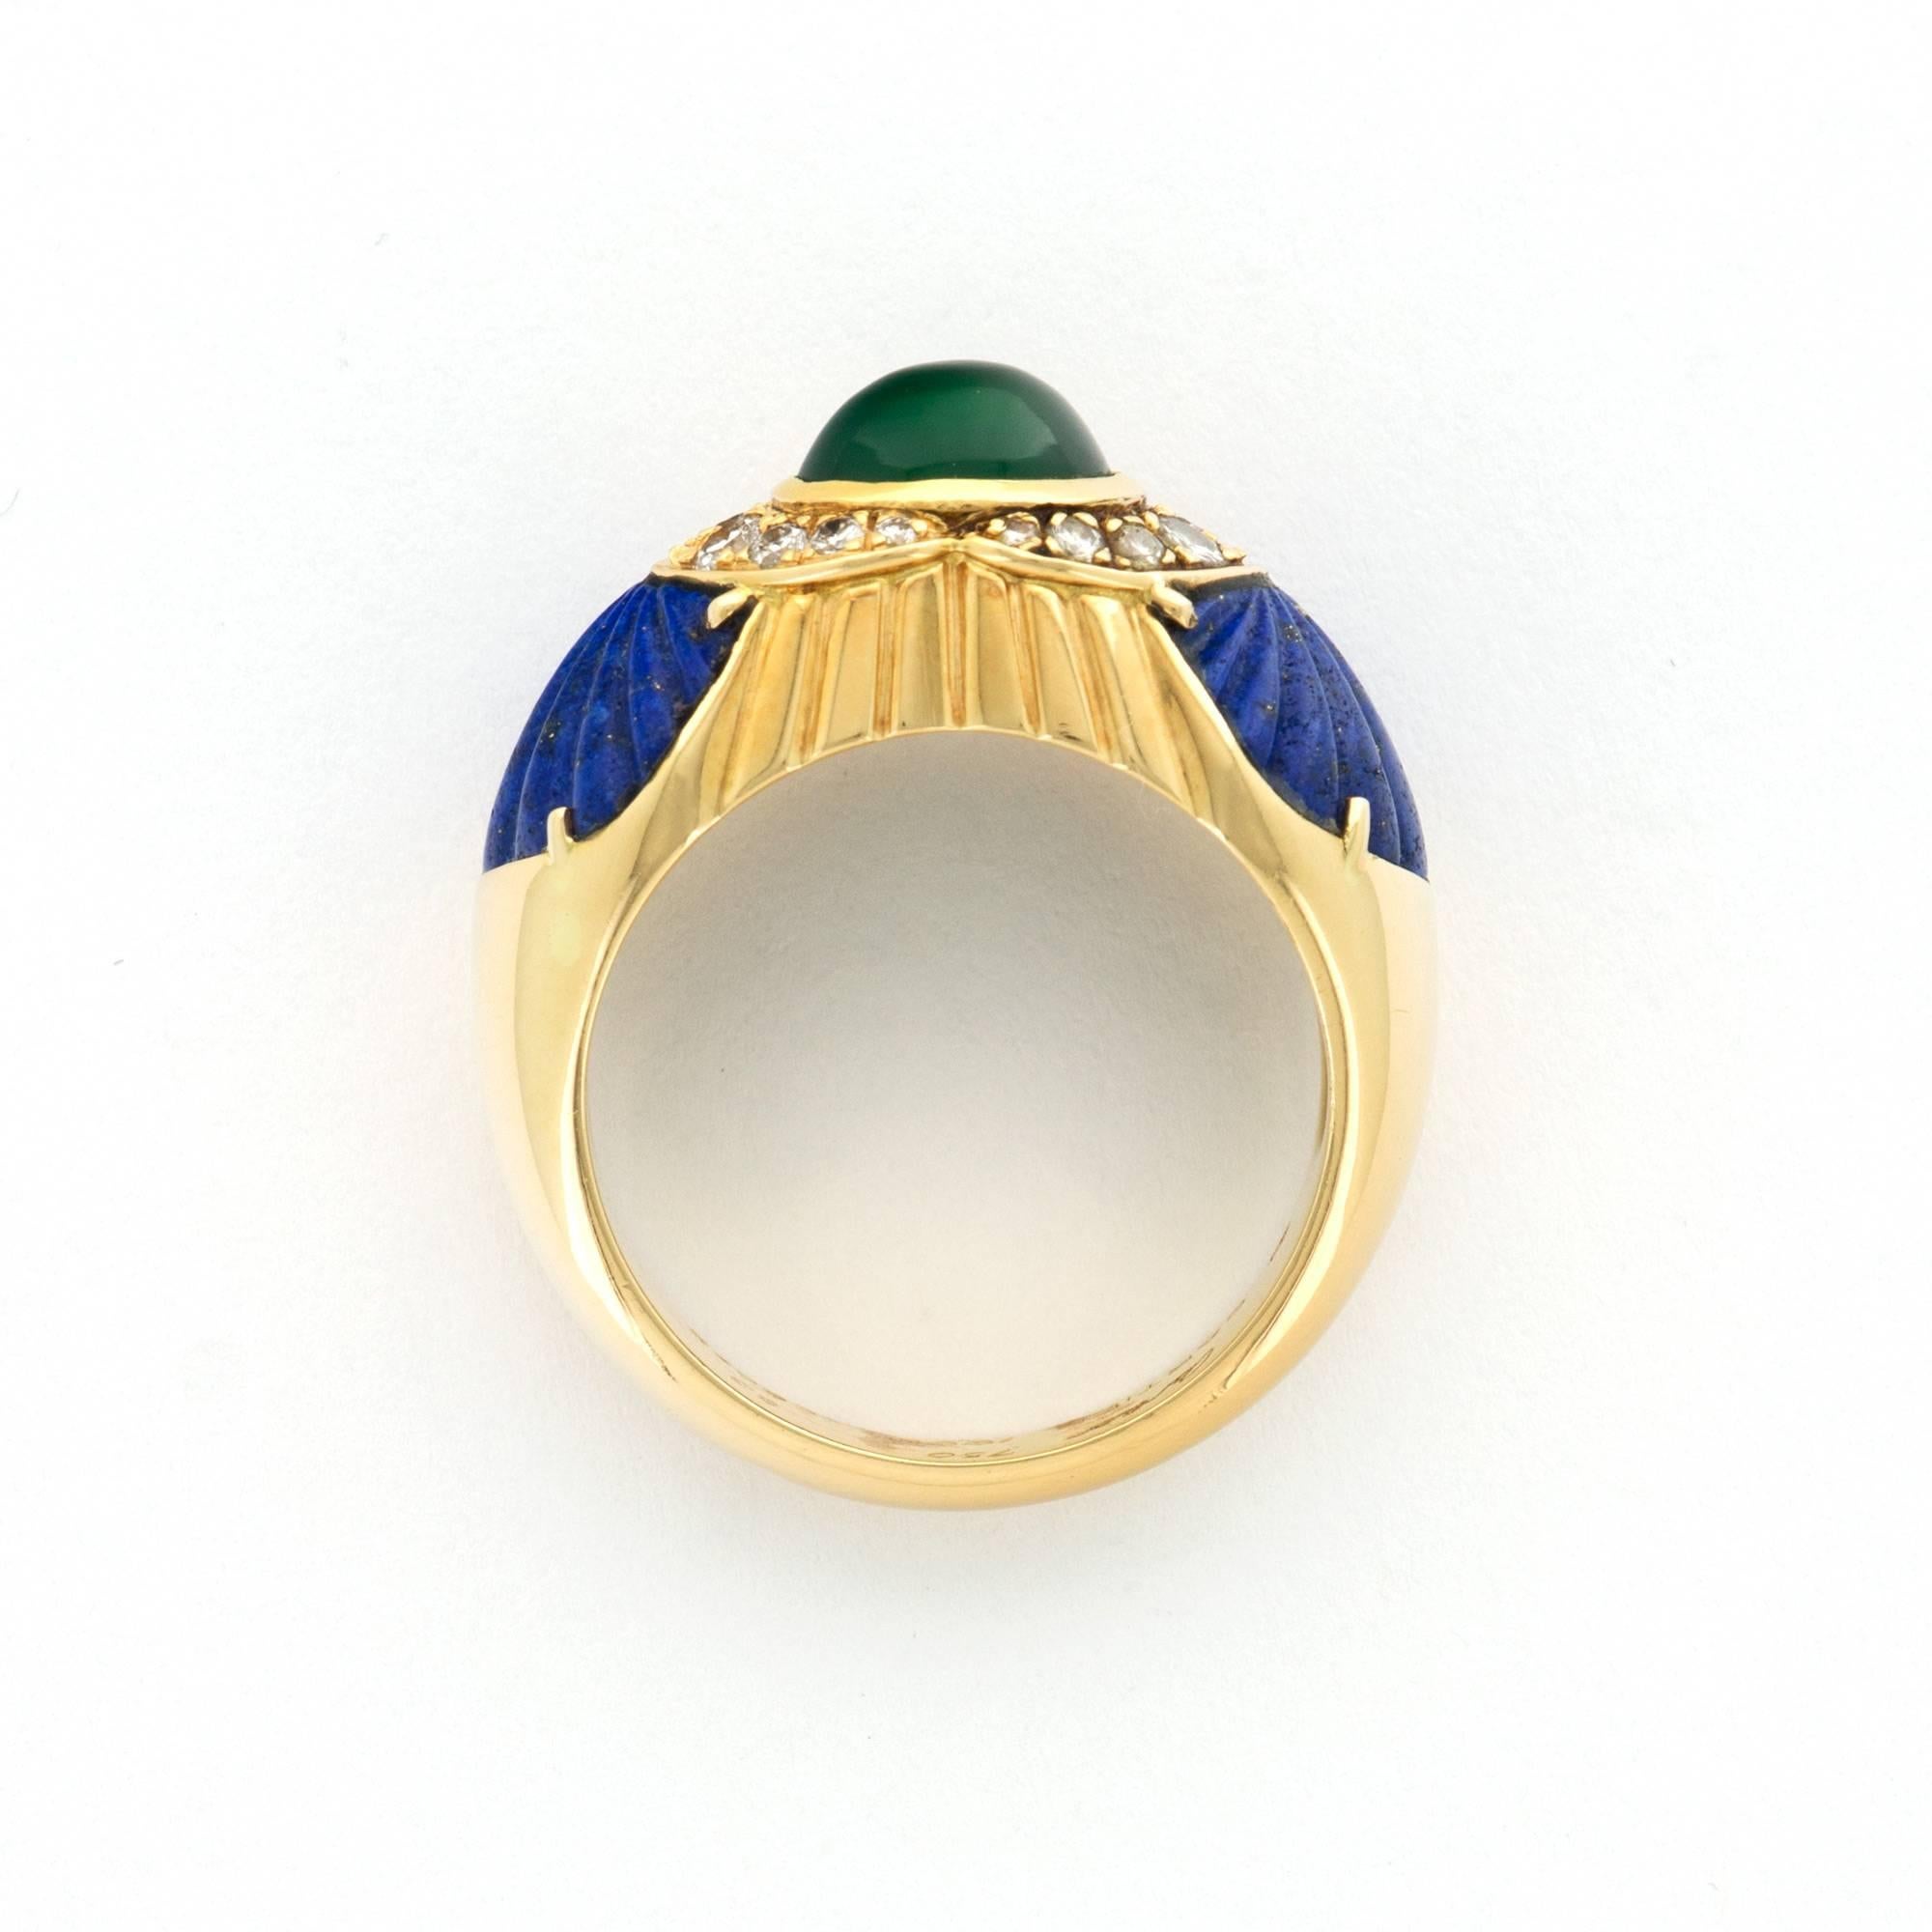 A Beautiful 18k Yellow Gold Cabochon Emerald Dome Ring with Lapis and Diamonds, By Cartier. Made in France. Size 53. Circa 1990.